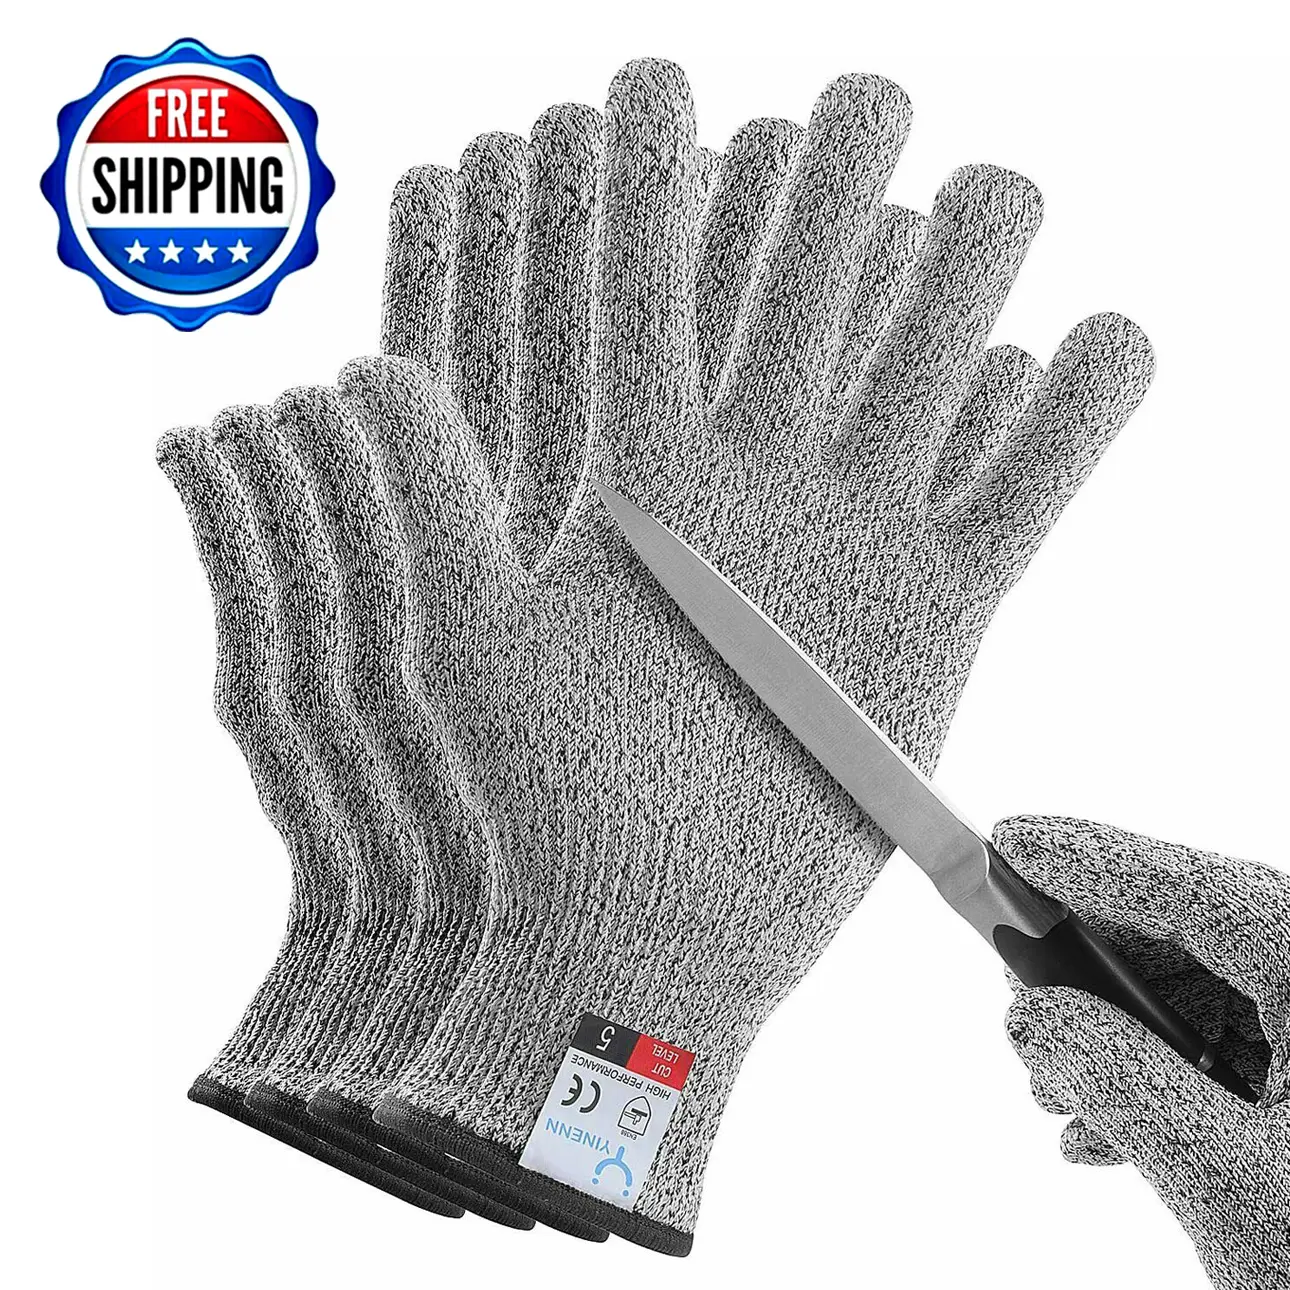 USA Warehouse Shipping Within 24h 2 Pairs Cut Proof Resistant Work Gloves Kitchen Food Grade Level 5 Protection